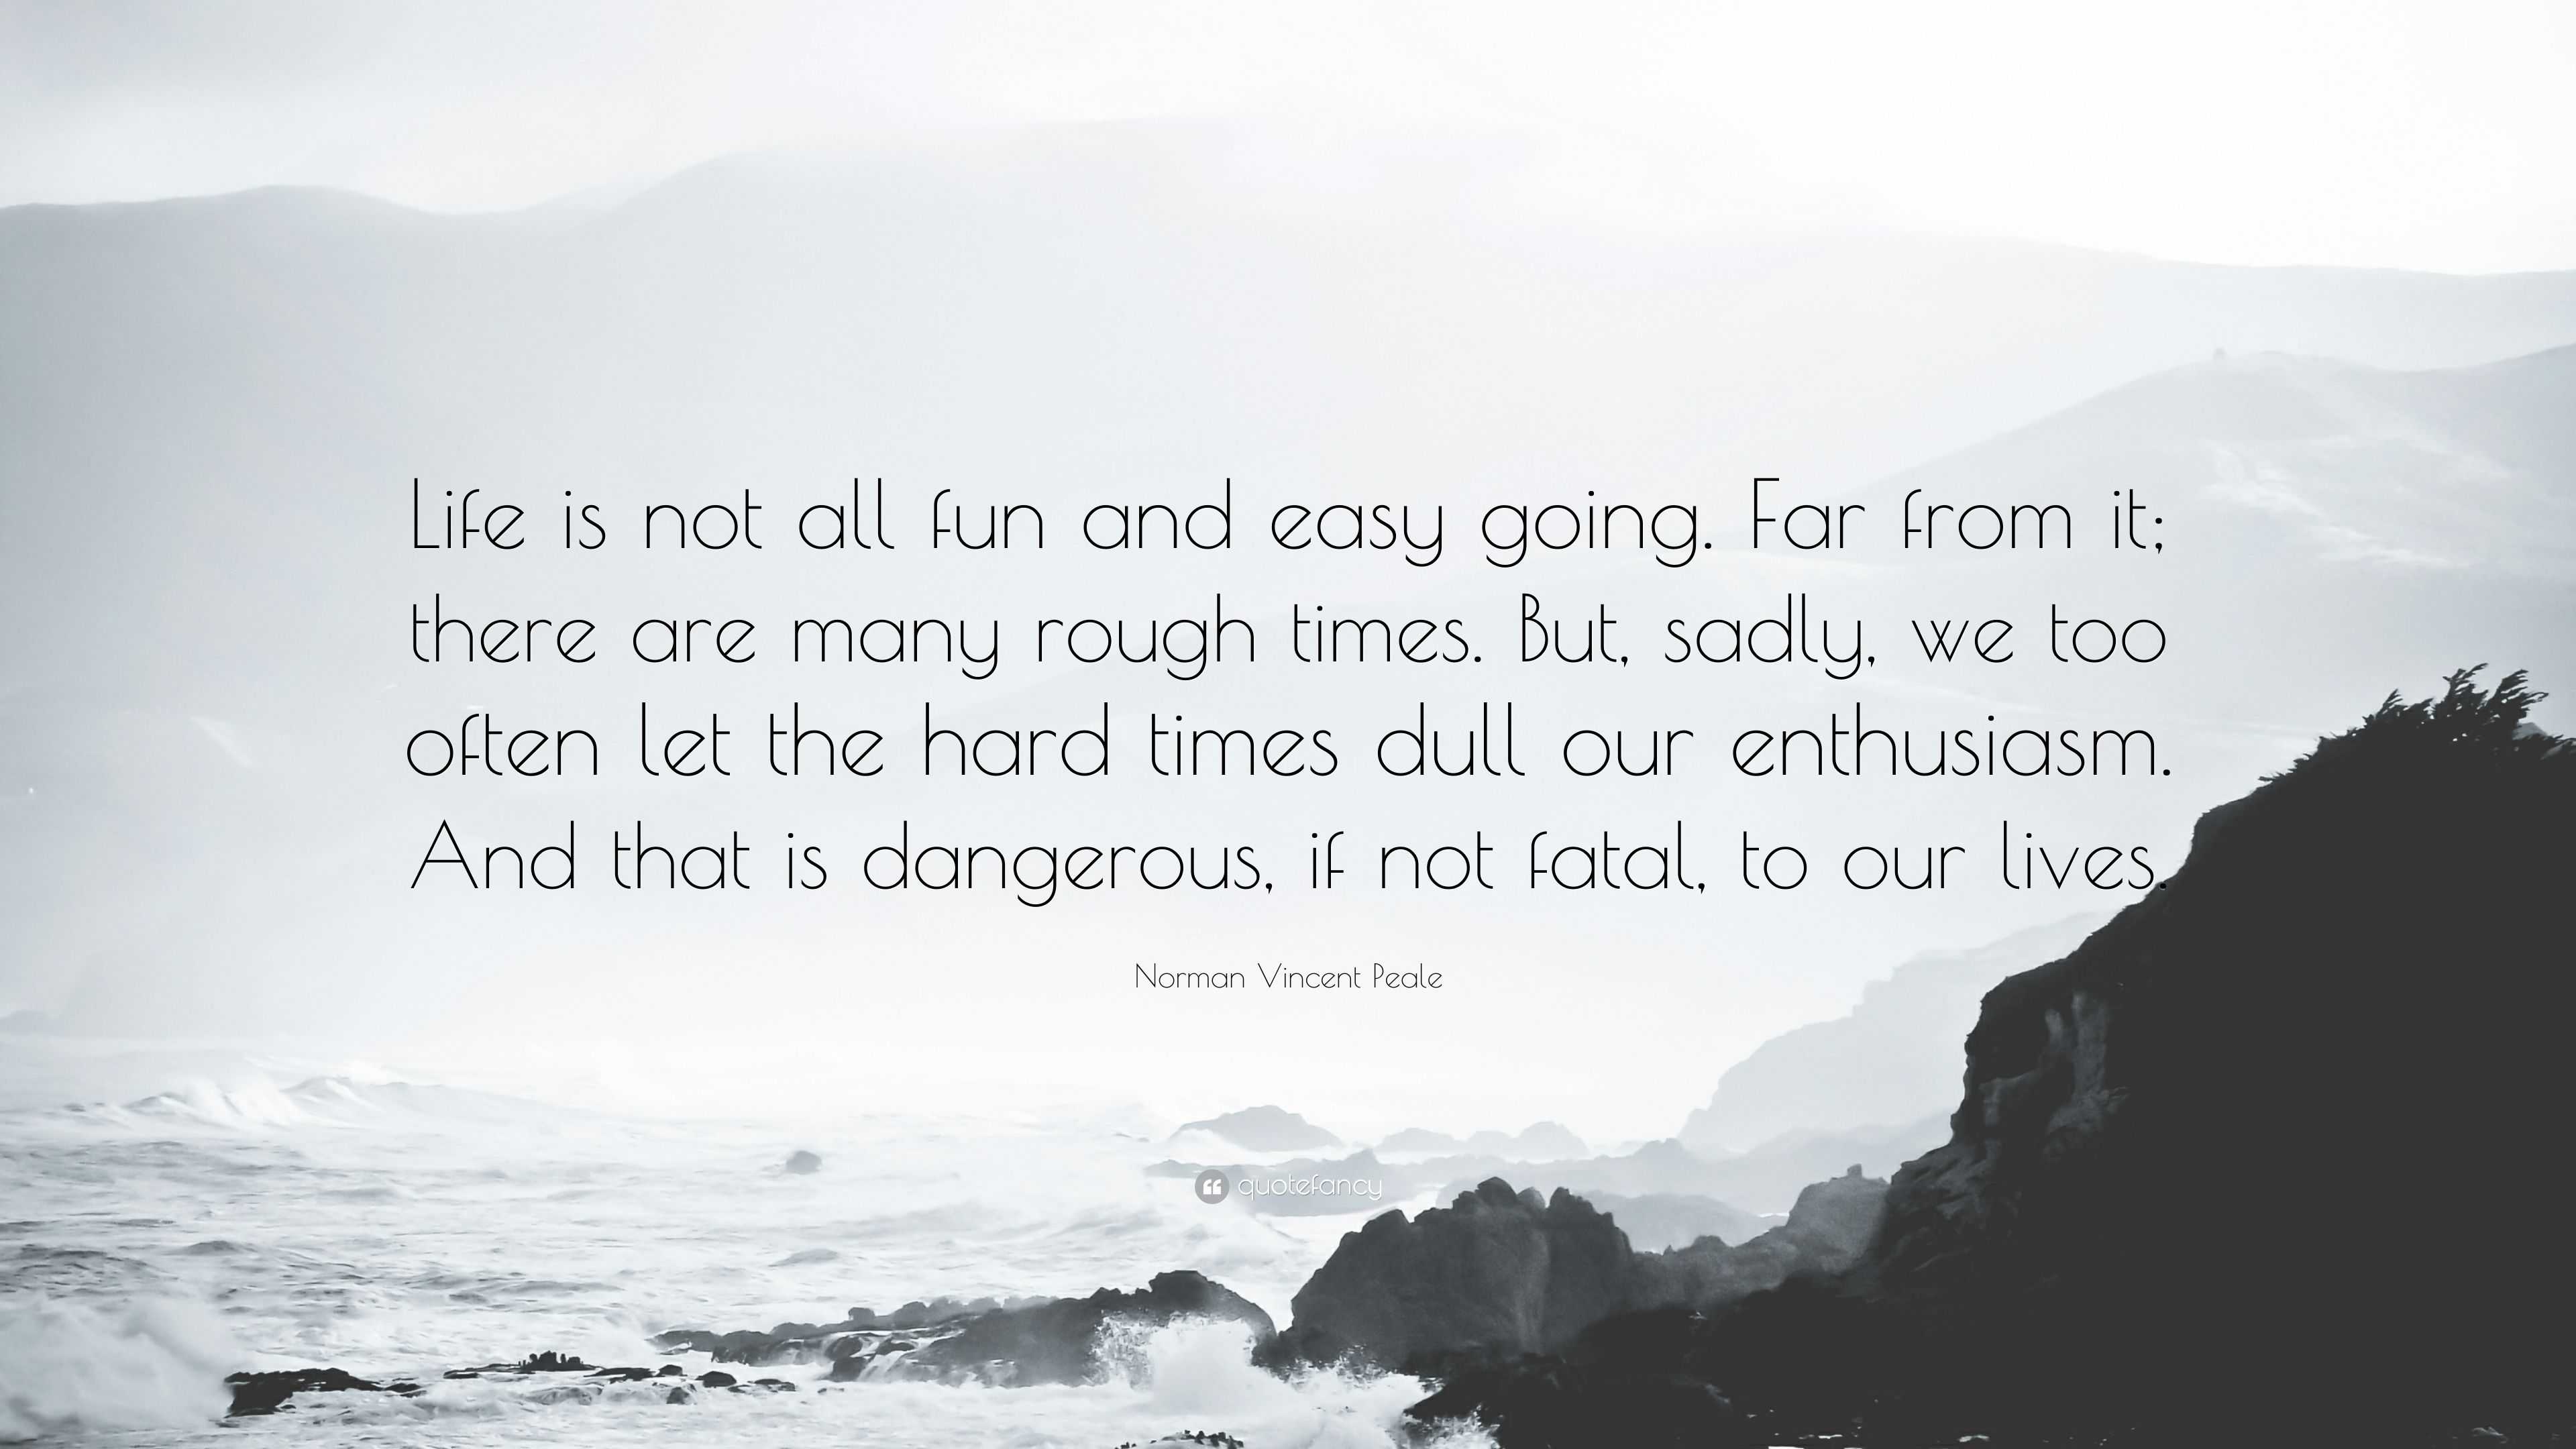 Norman Vincent Peale Quote “Life is not all fun and easy going Far